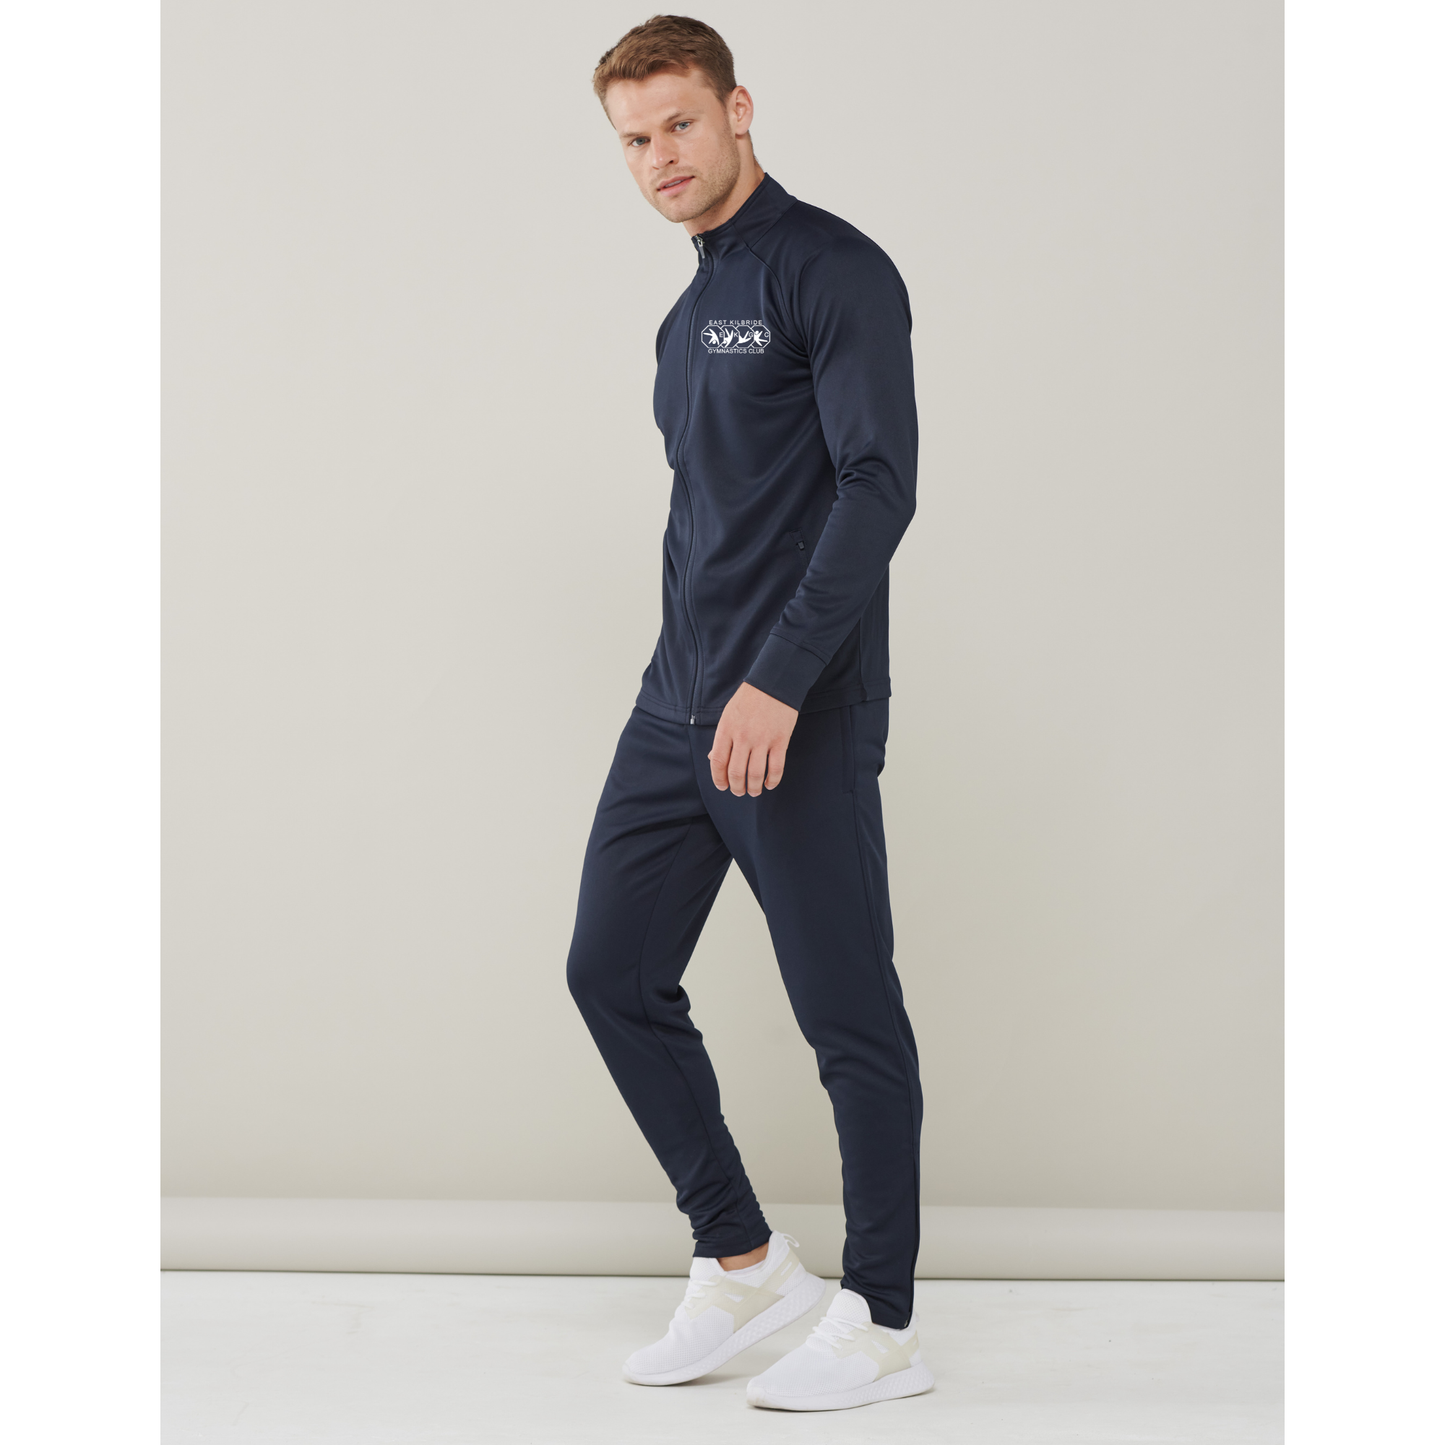 EKGC Competition Tracksuit Top ONLY - Full Zip